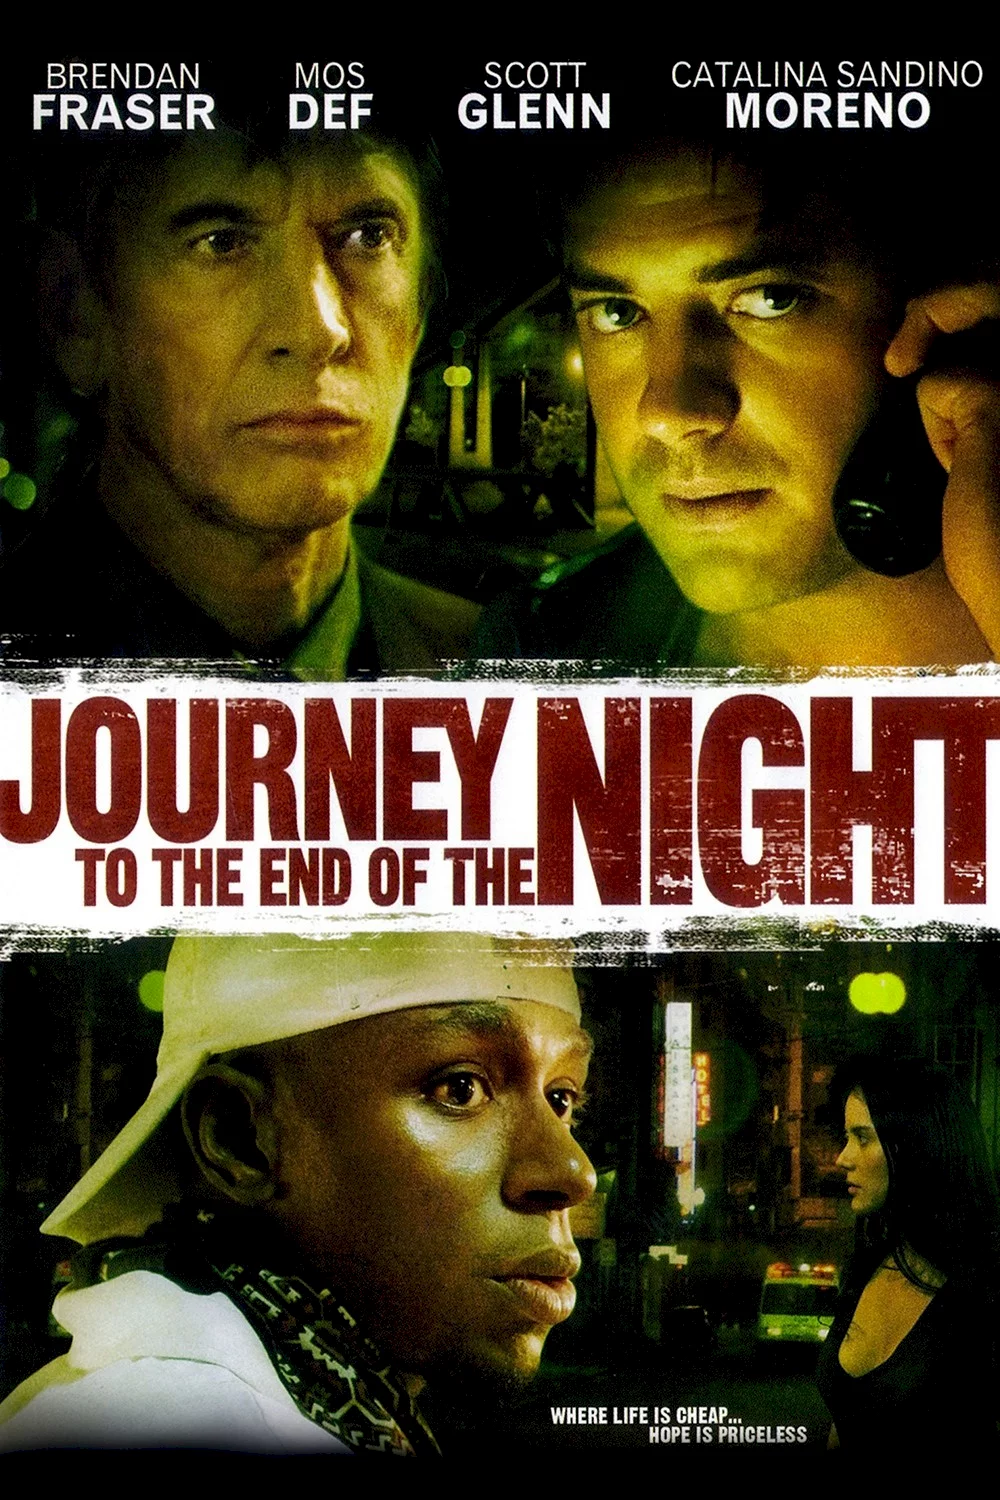 Photo 1 du film : End of the night